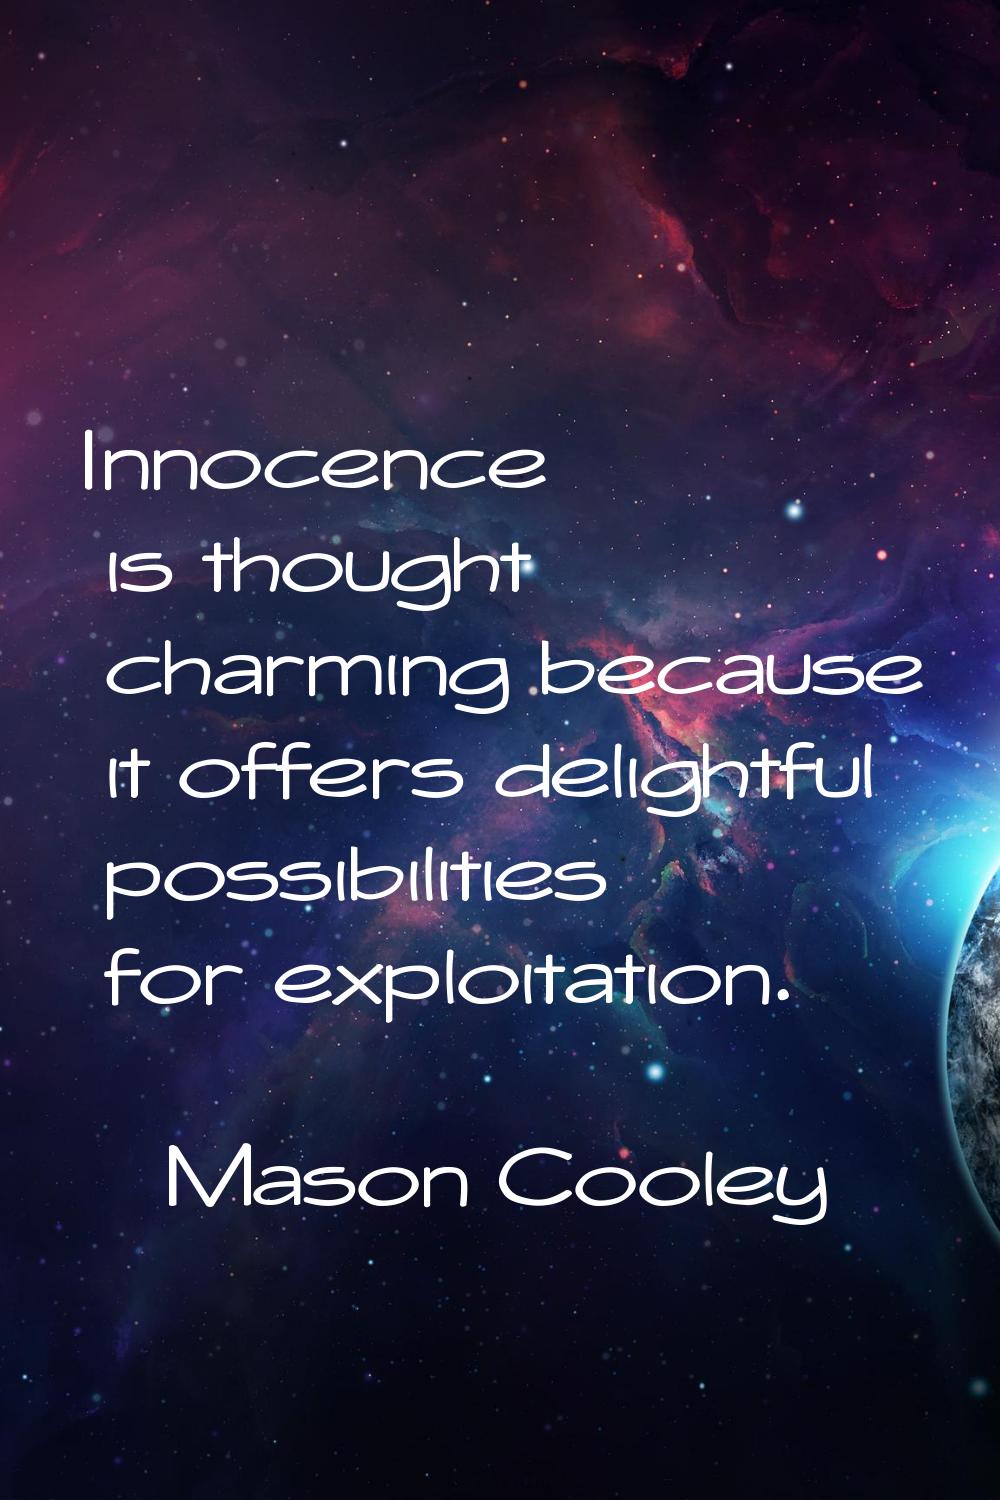 Innocence is thought charming because it offers delightful possibilities for exploitation.